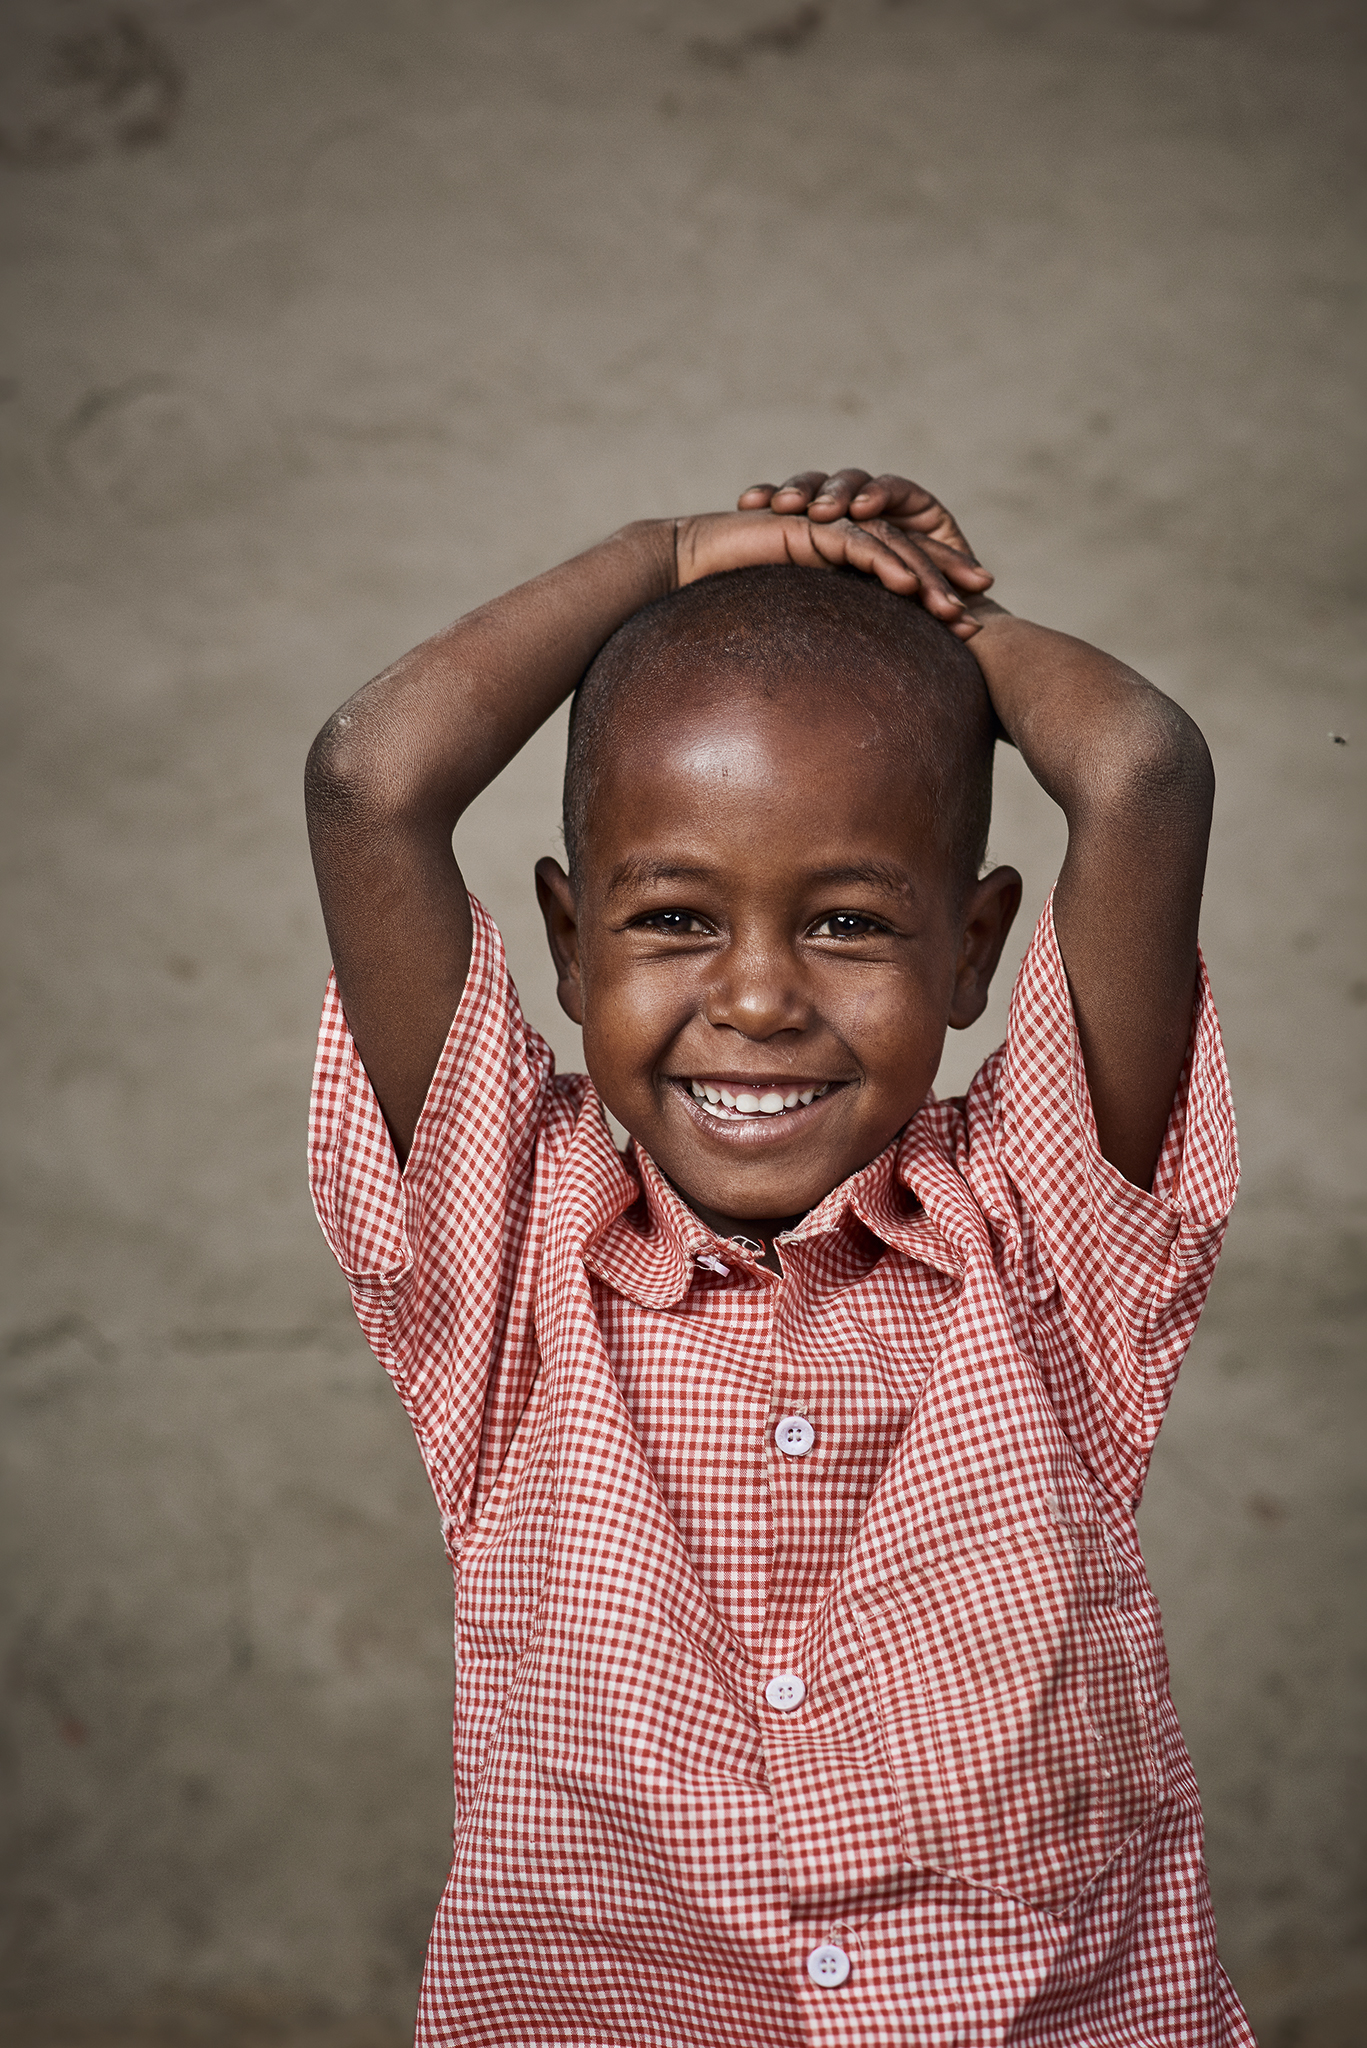 Mohamad Nasir, 5, poses for a portrait in Ethiopia on Oct. 19, 2017.